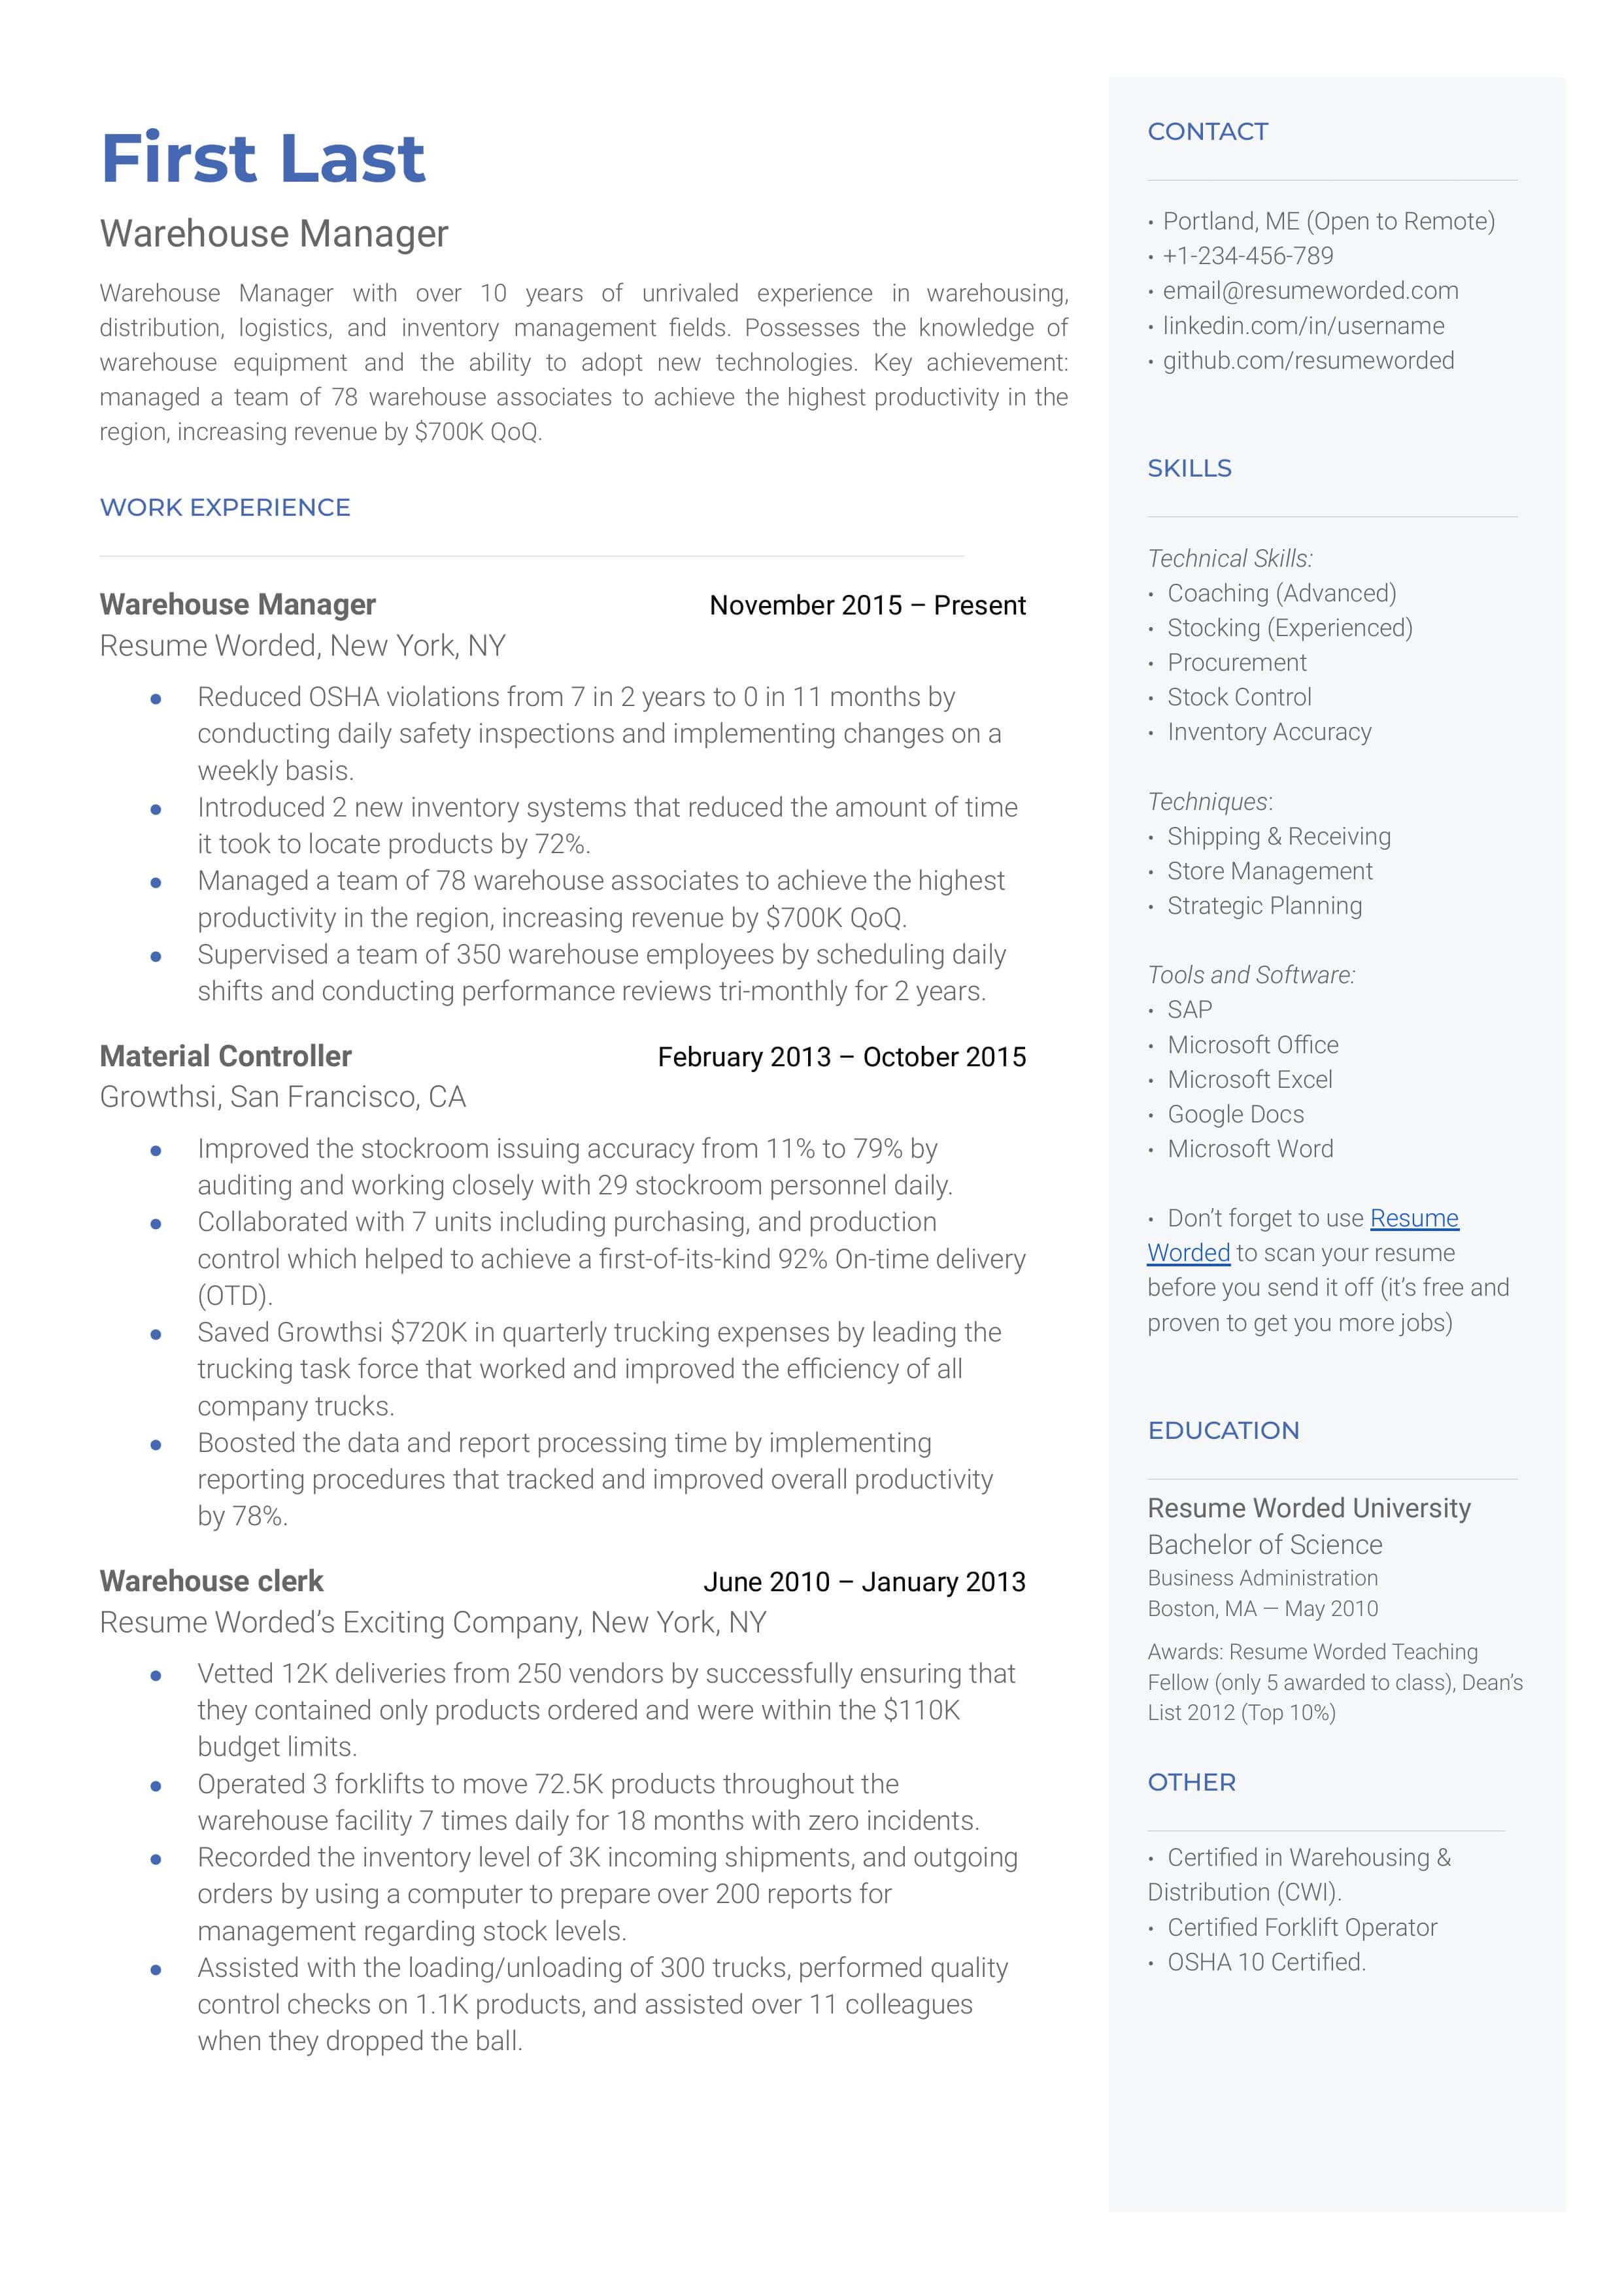 A warehouse manager resume template that showcases work experience, contact info, and skills